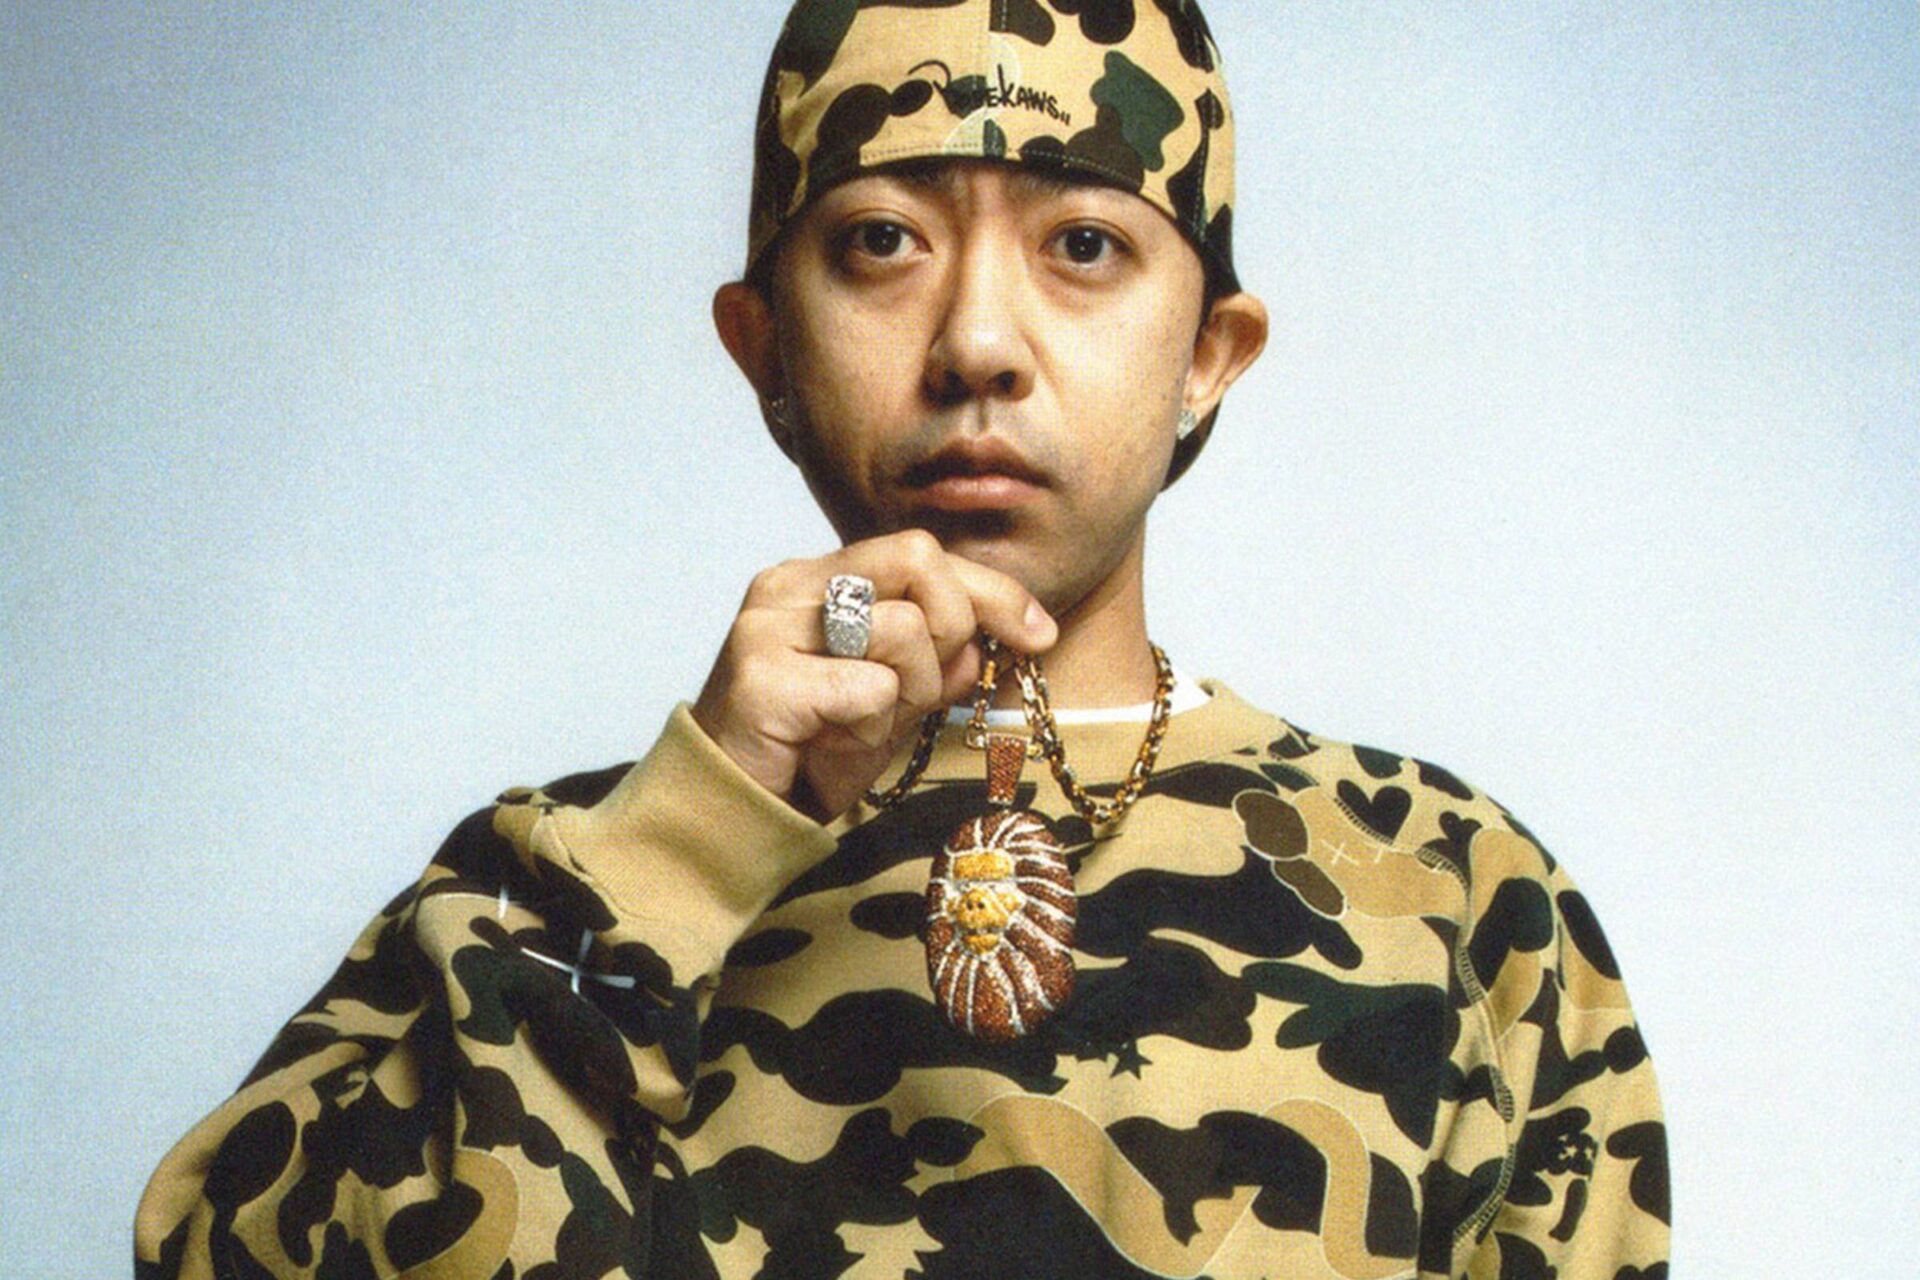 Nigo, the godfather of streetwear as we know it, makes his debut